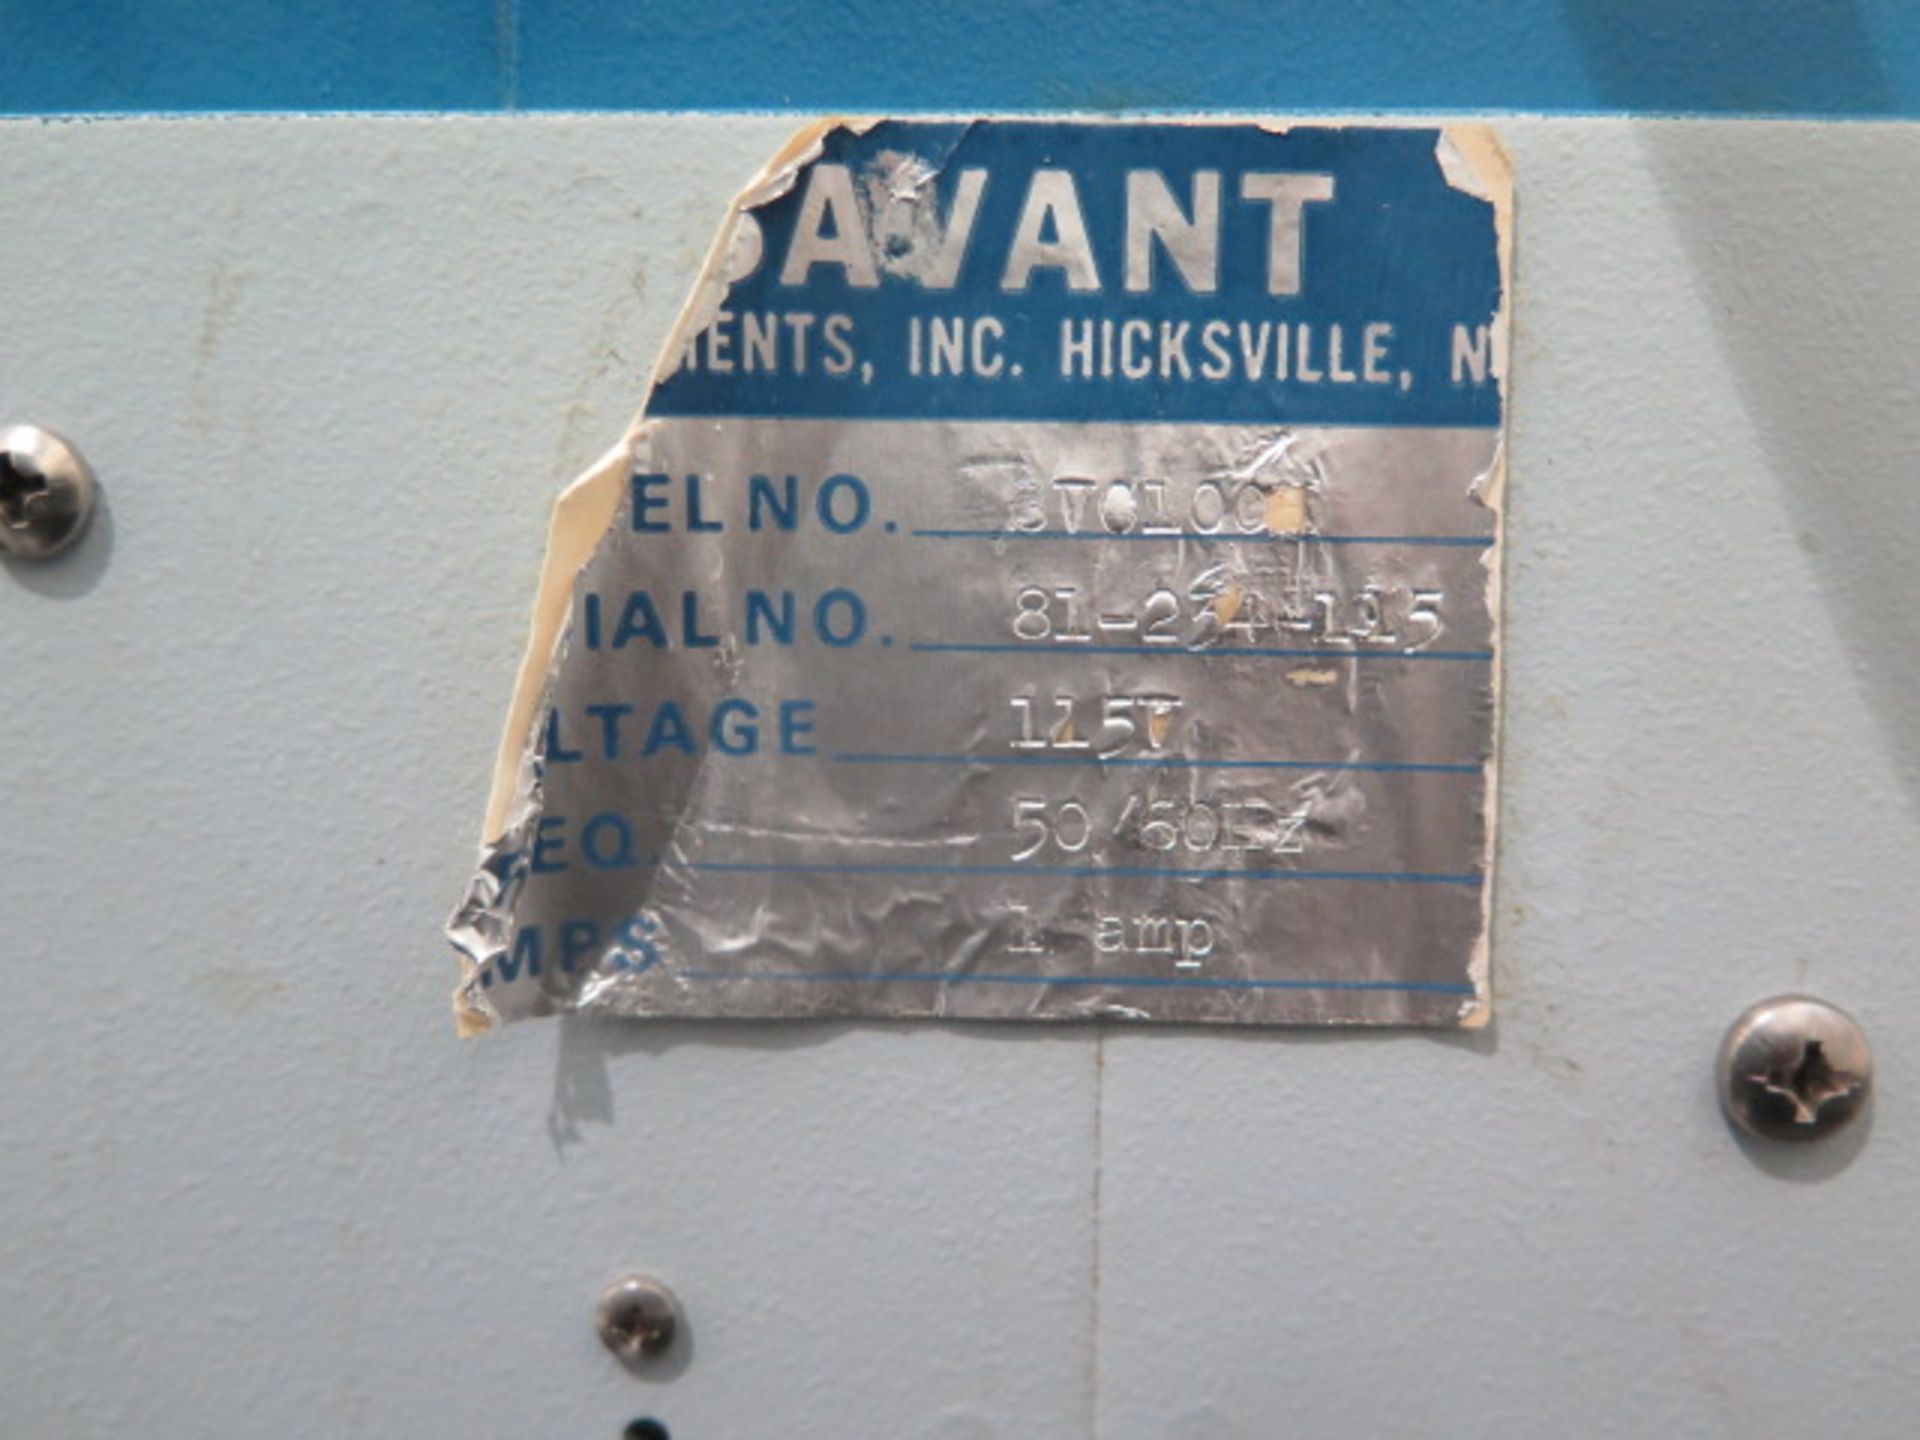 Savant "Speed Vac Concentrator" Vacuum Centrifuge (SOLD AS-IS - NO WARRANTY) - Image 6 of 6